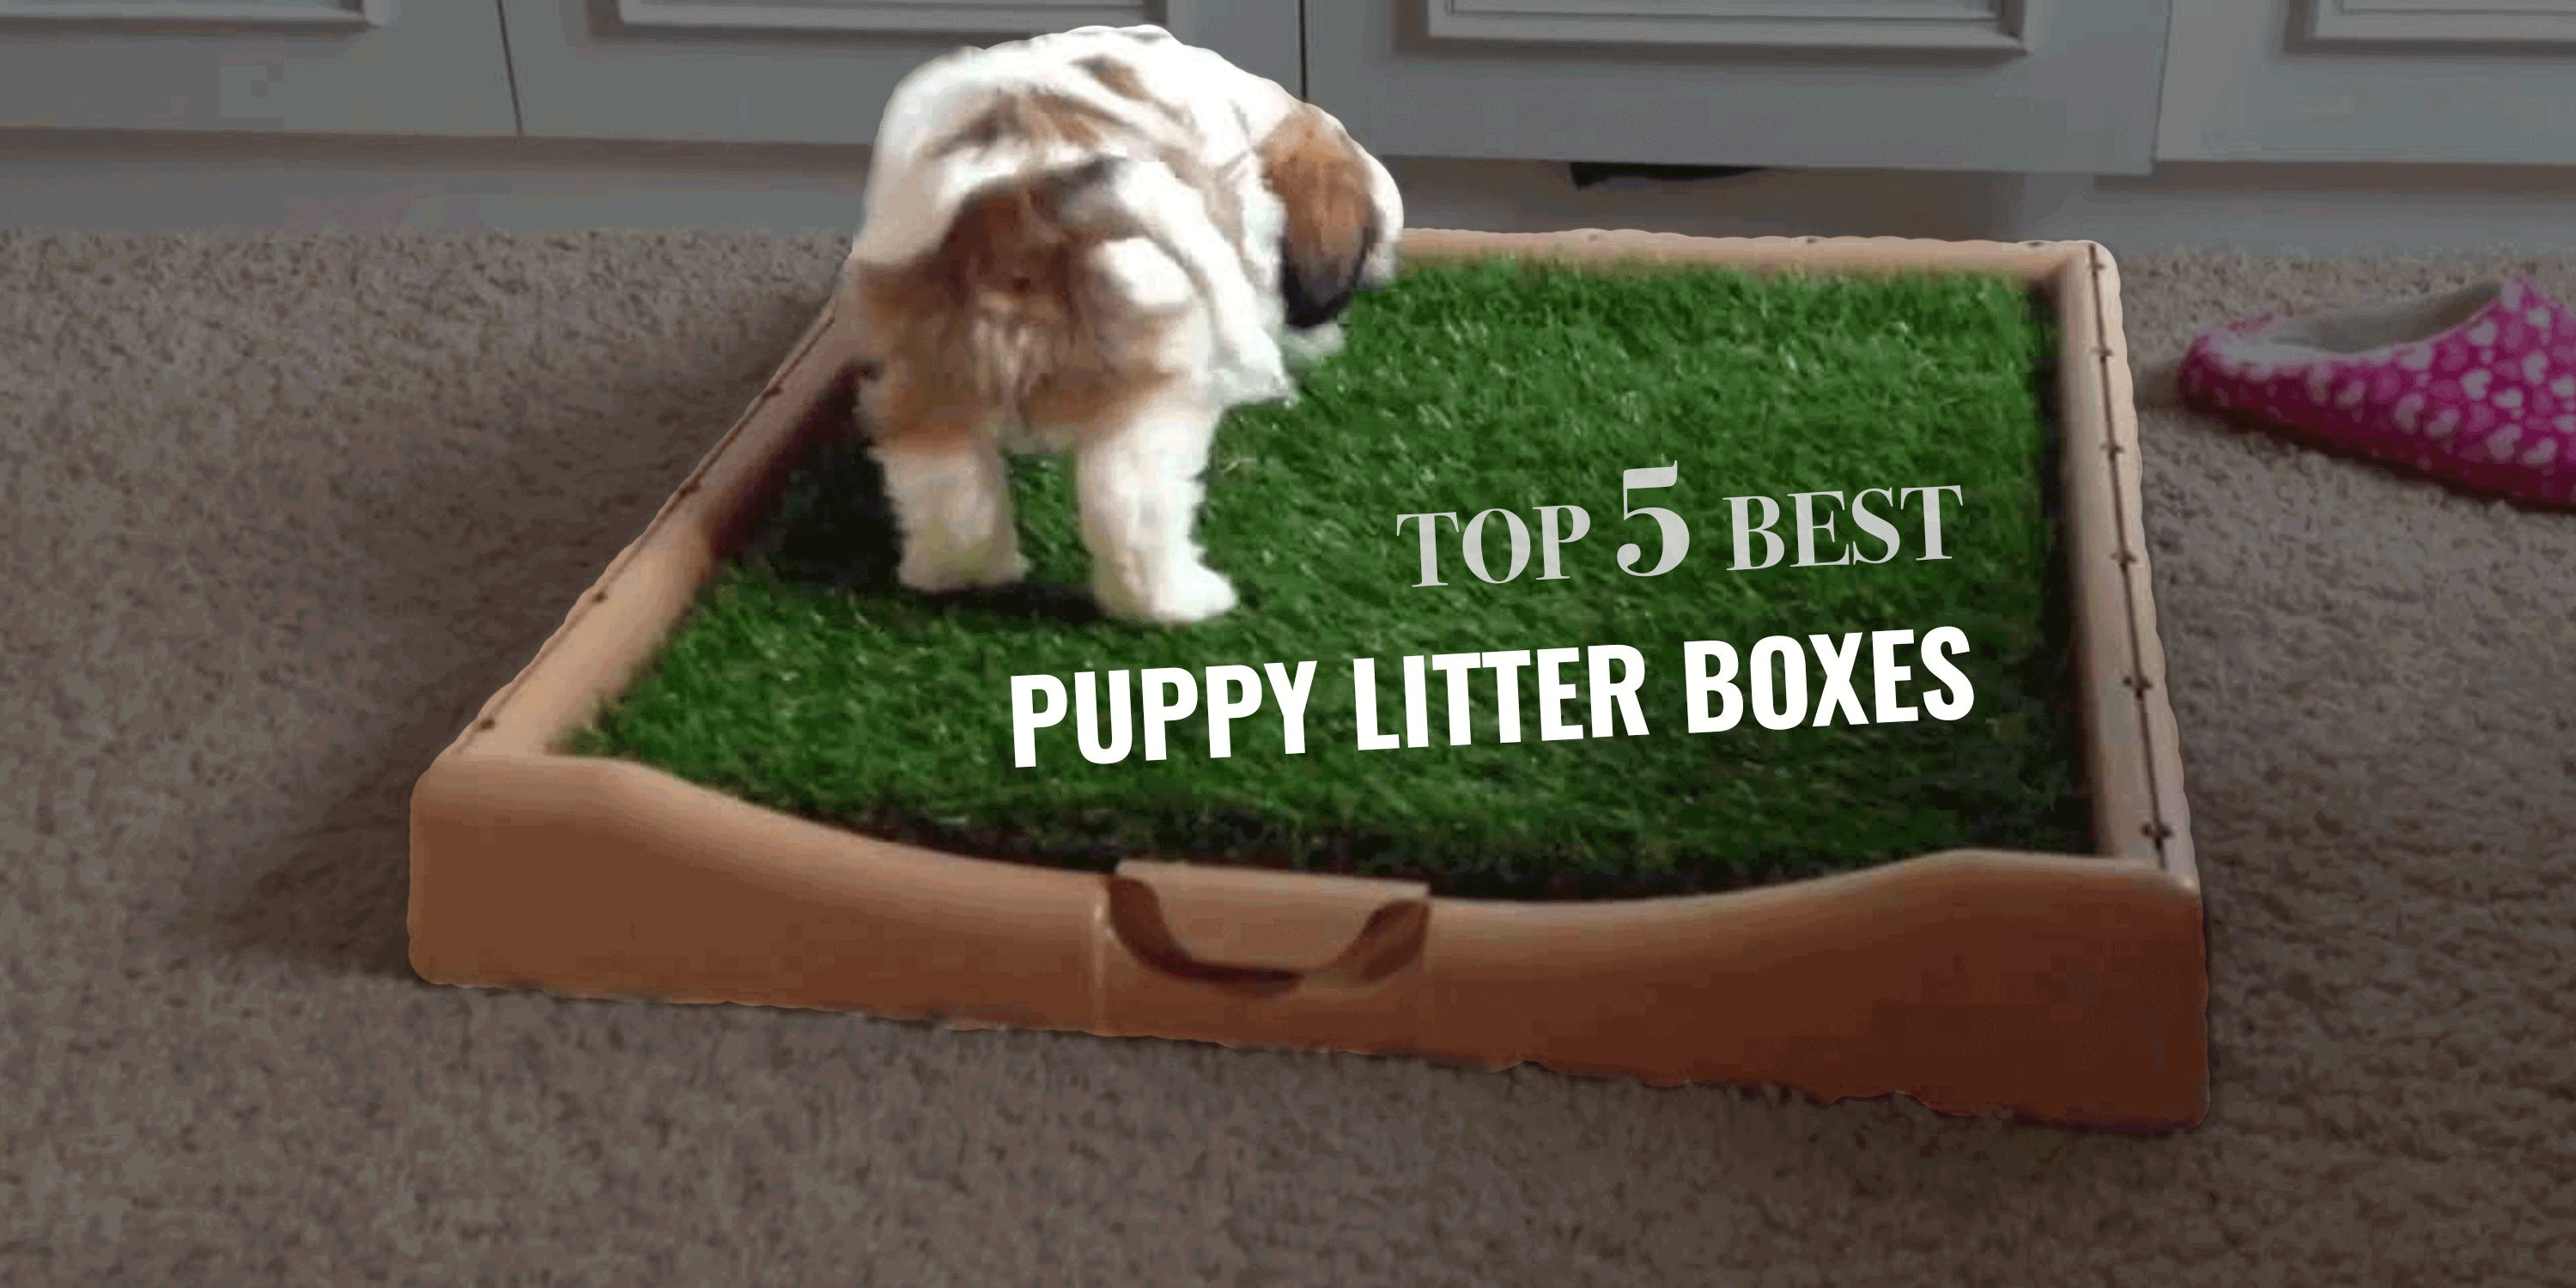 Review: Best Puppy Litter Boxes